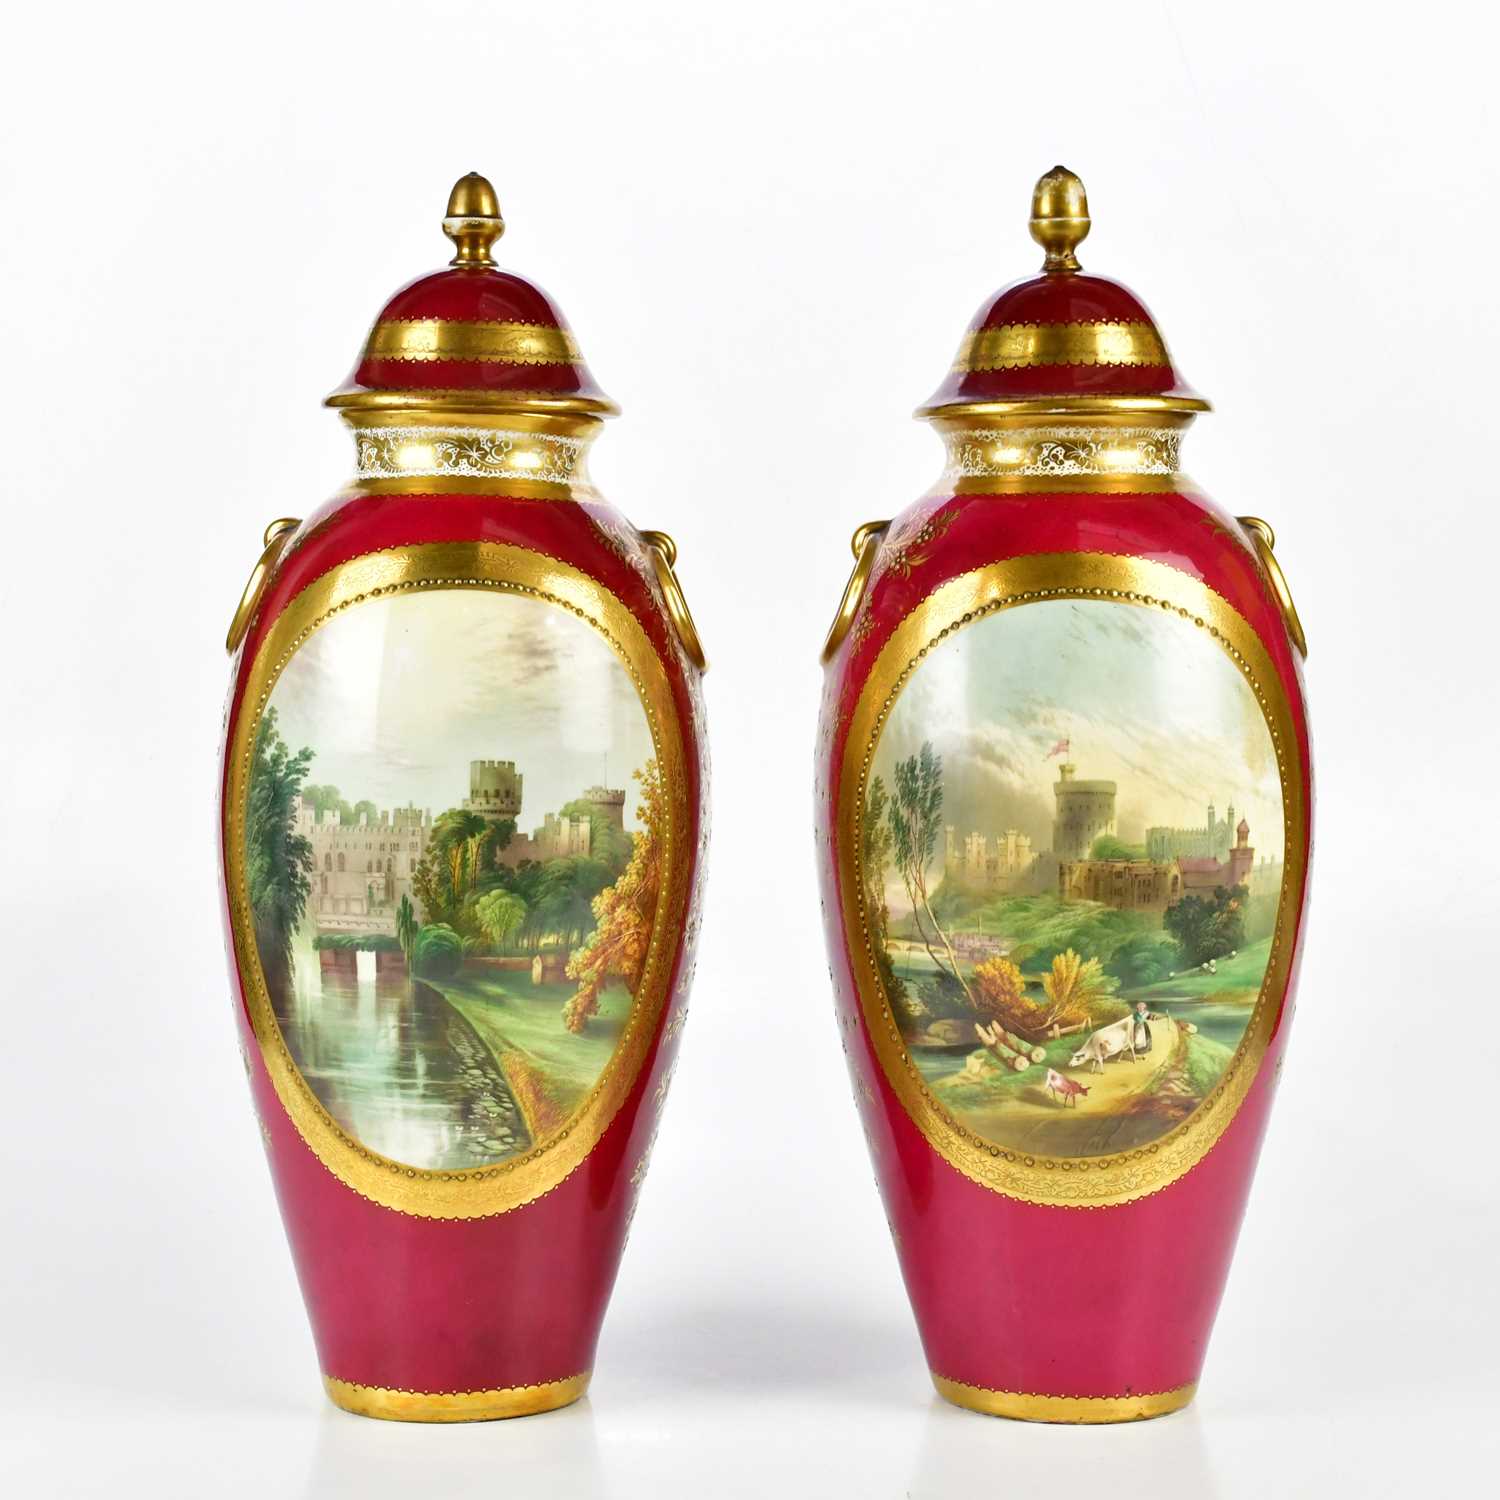 A pair of 19th century Staffordshire ovoid vases and covers, hand painted with scenes of Windsor